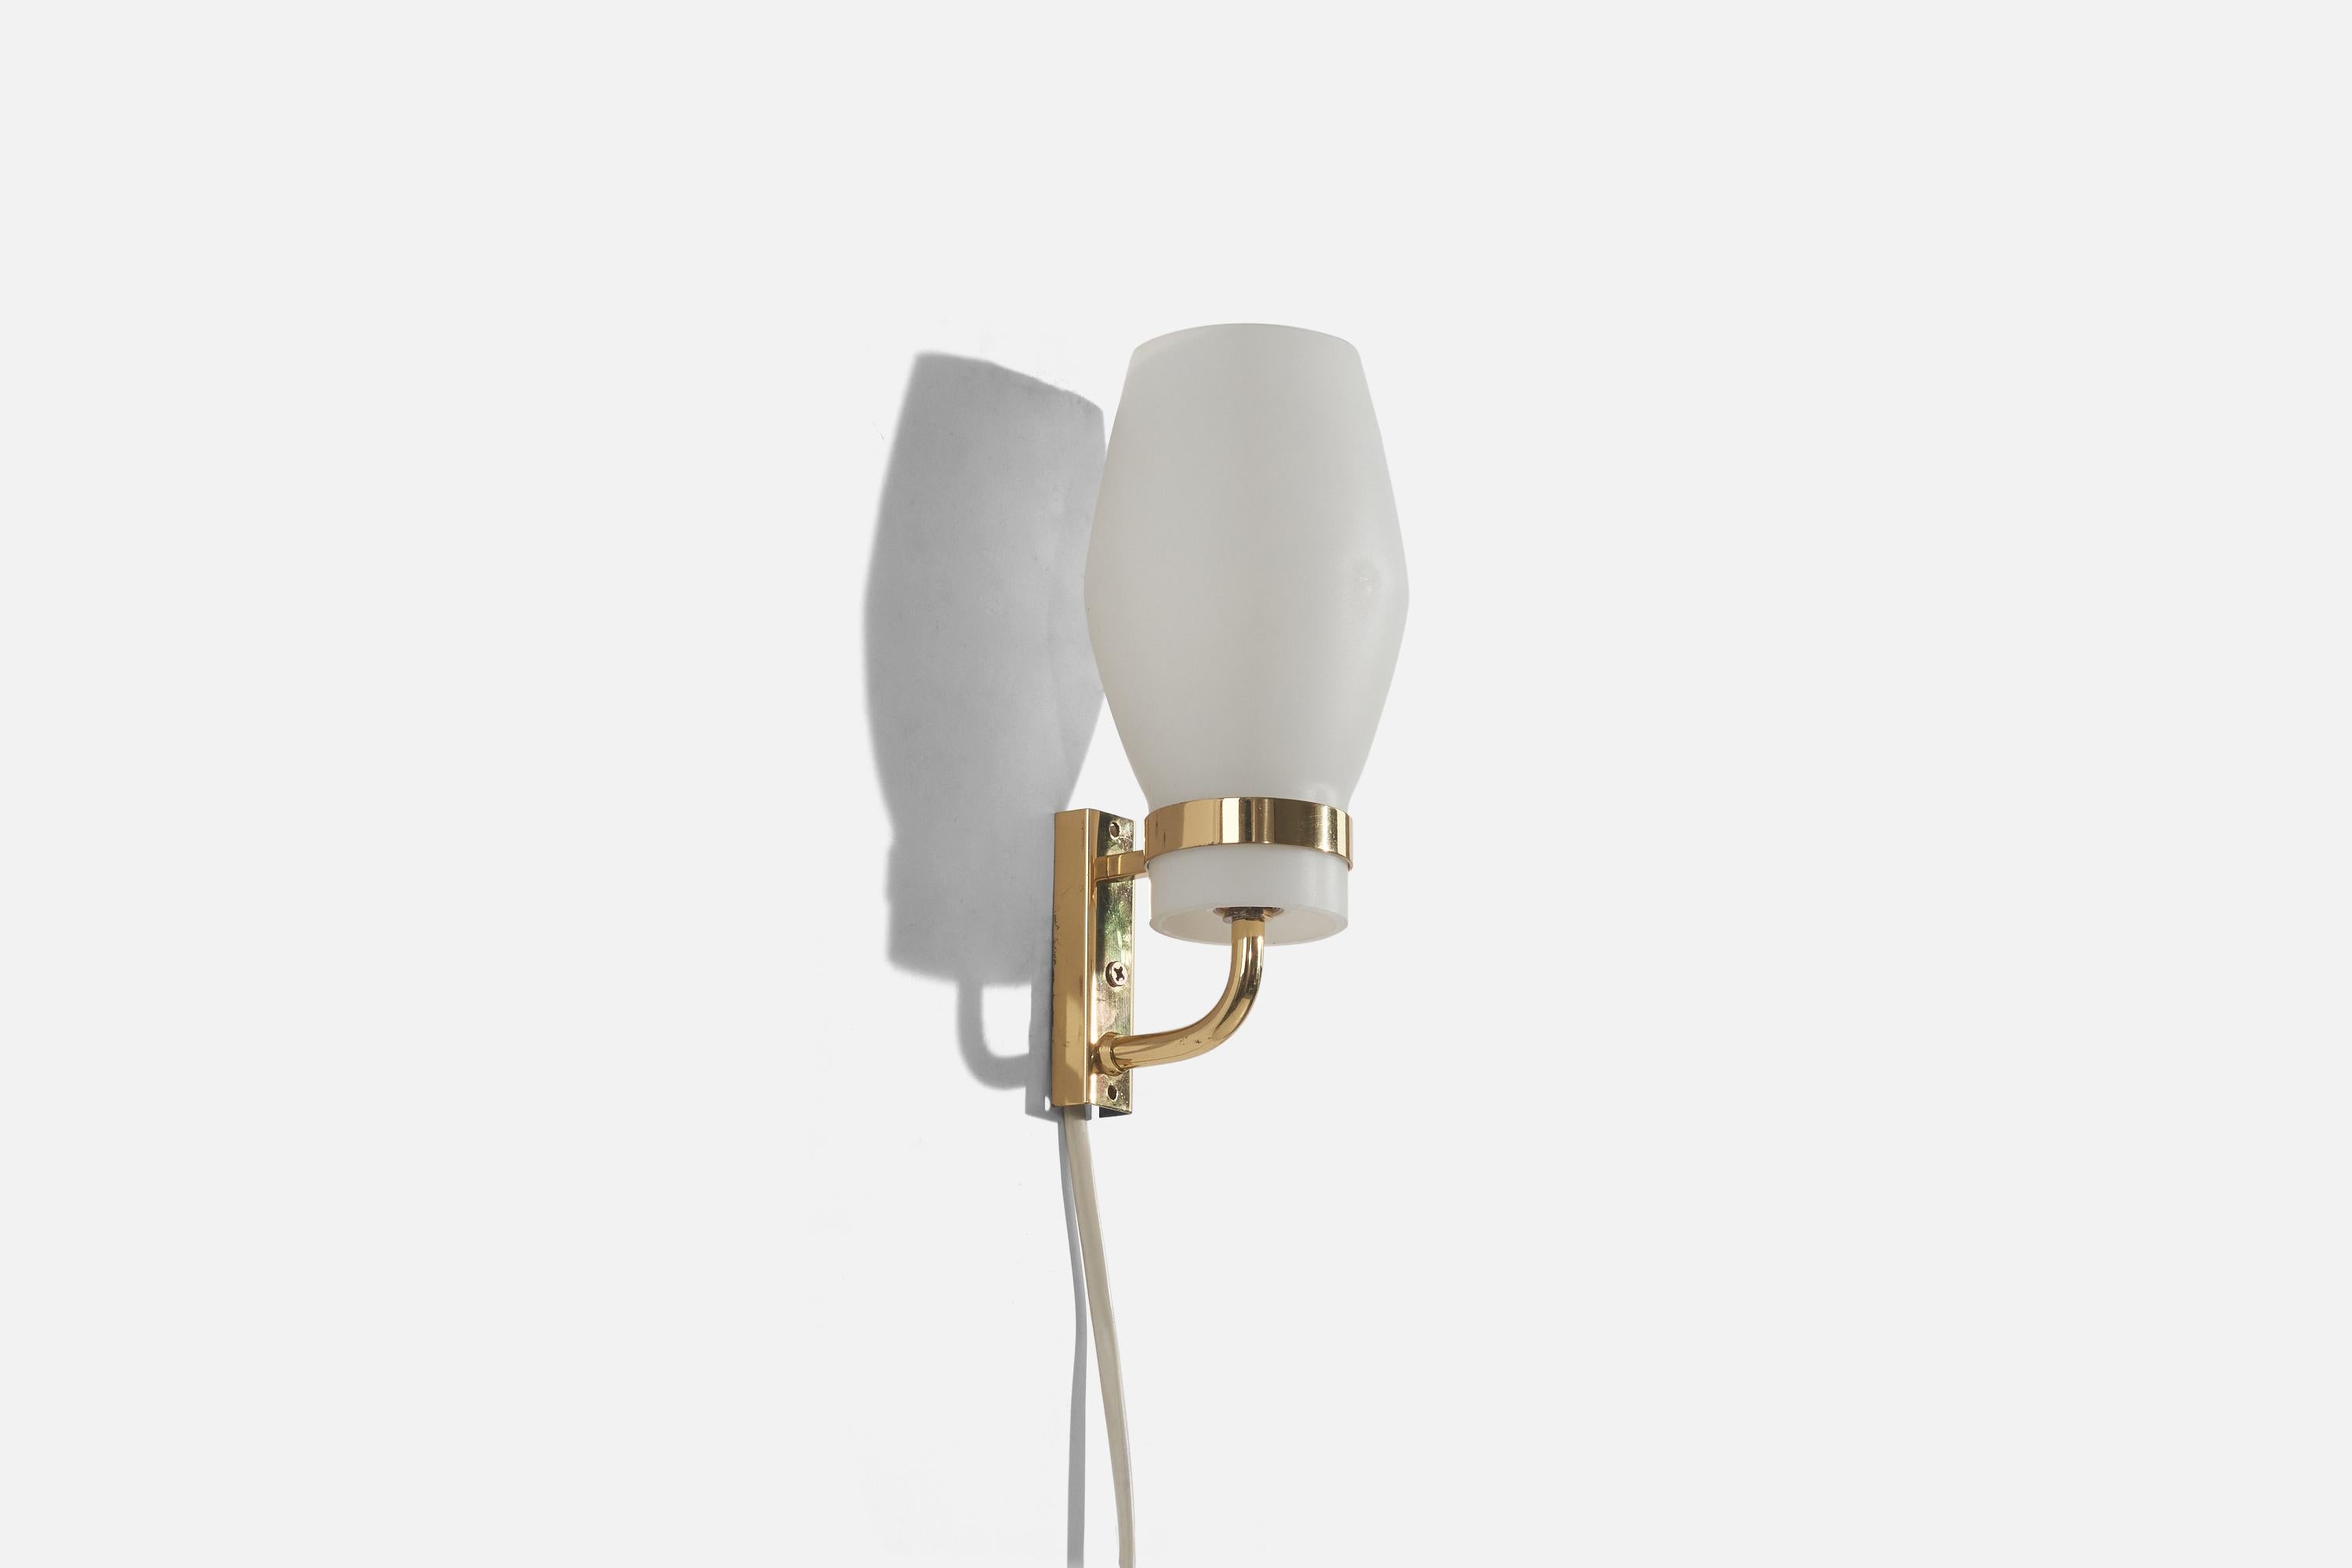 A brass and glass sconce designed and produced in Sweden, c. 1950s.

Dimensions of back plate (inches) : 2.84 x 0.78 x 0.44 (H x W x D).